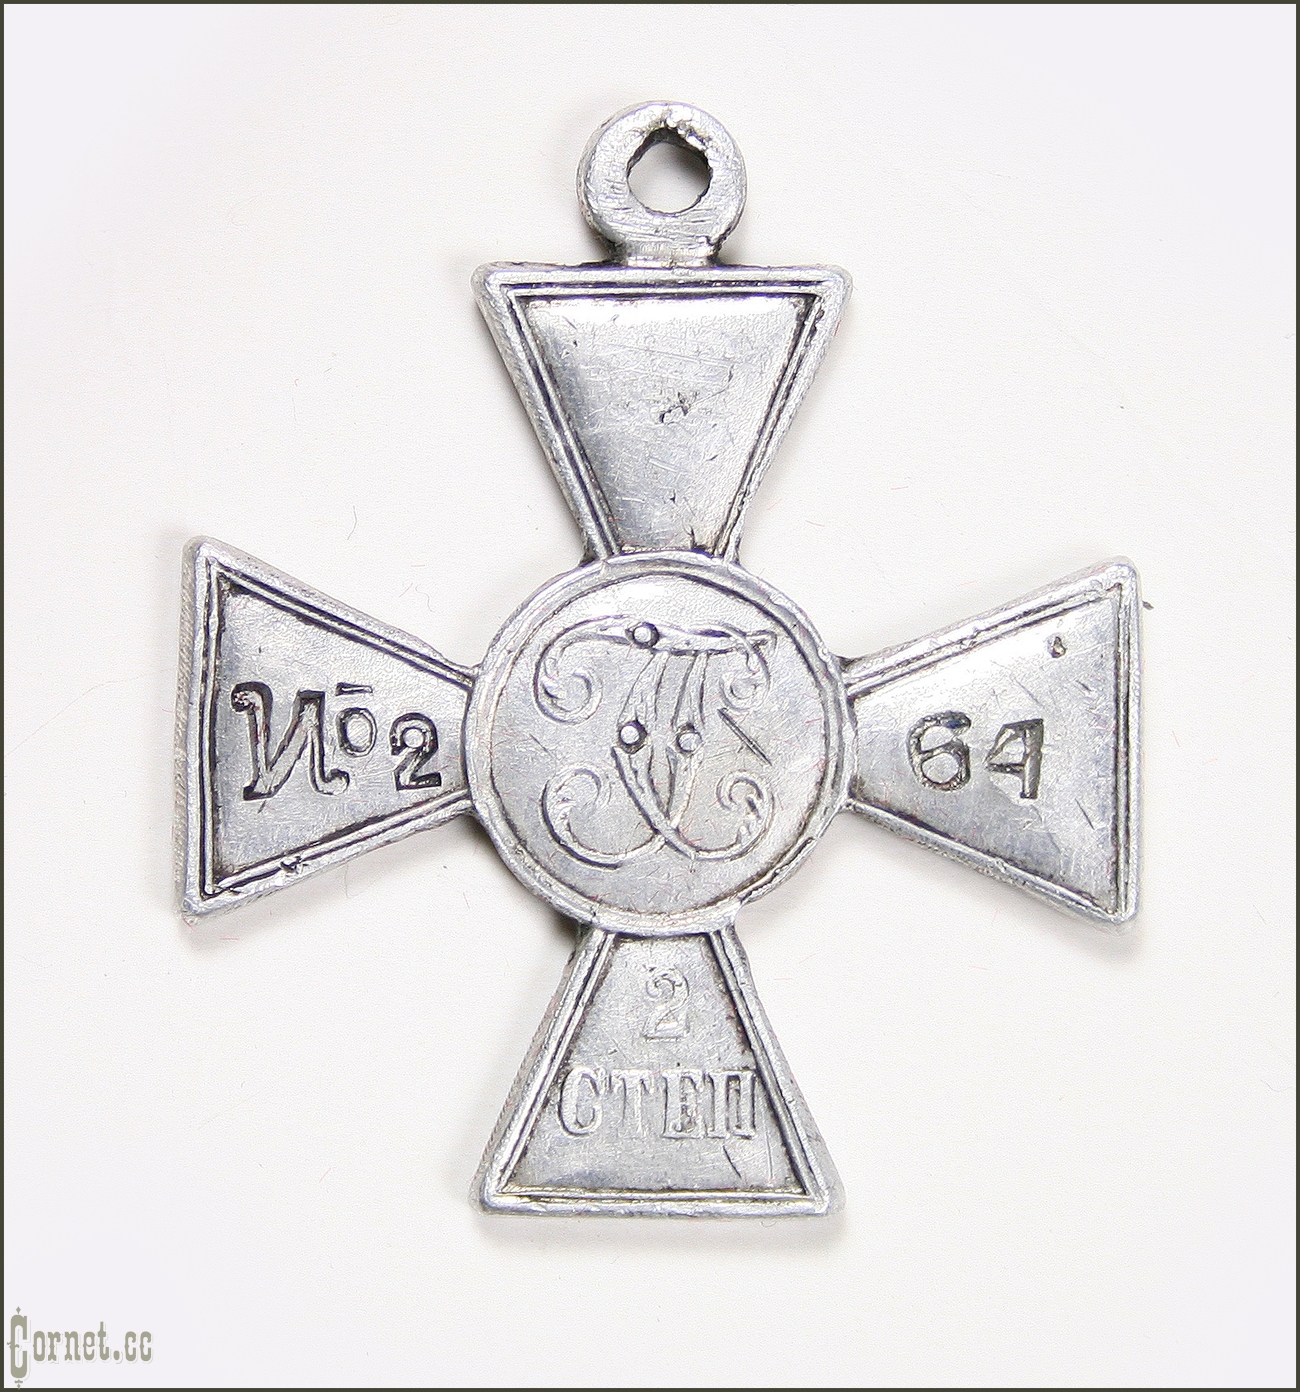 St. George's Cross of the 2nd class North of Russia.